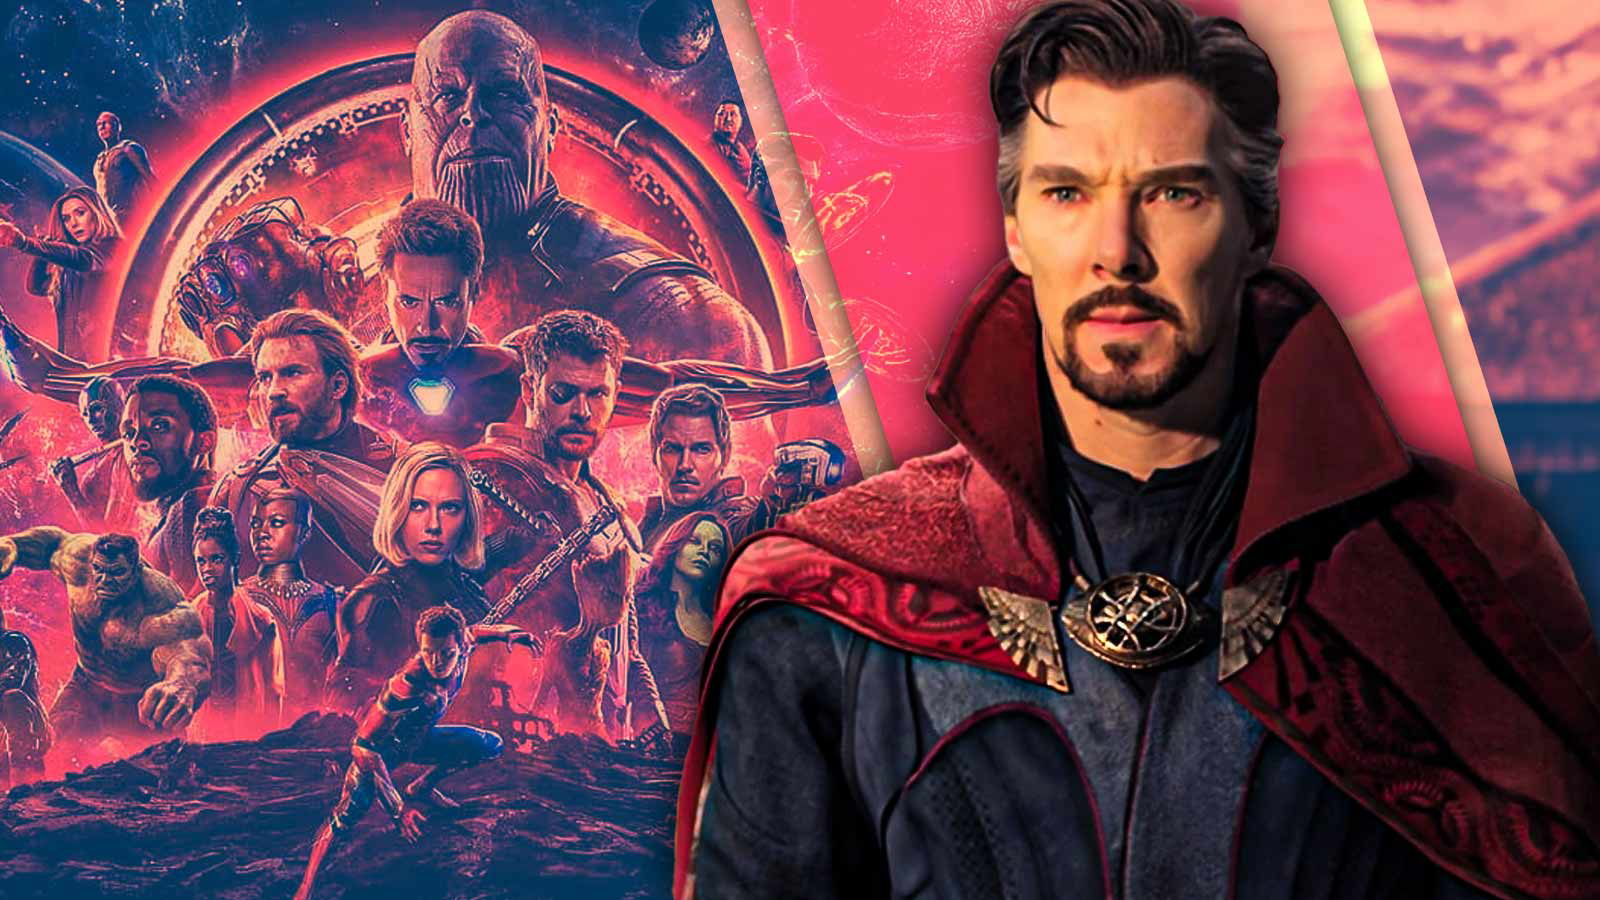 “The evil has been defeated”: Upcoming Avengers Movies Get a Major Update That’s Welcome News for Fans Who Hated Sam Raimi’s Doctor Strange 2